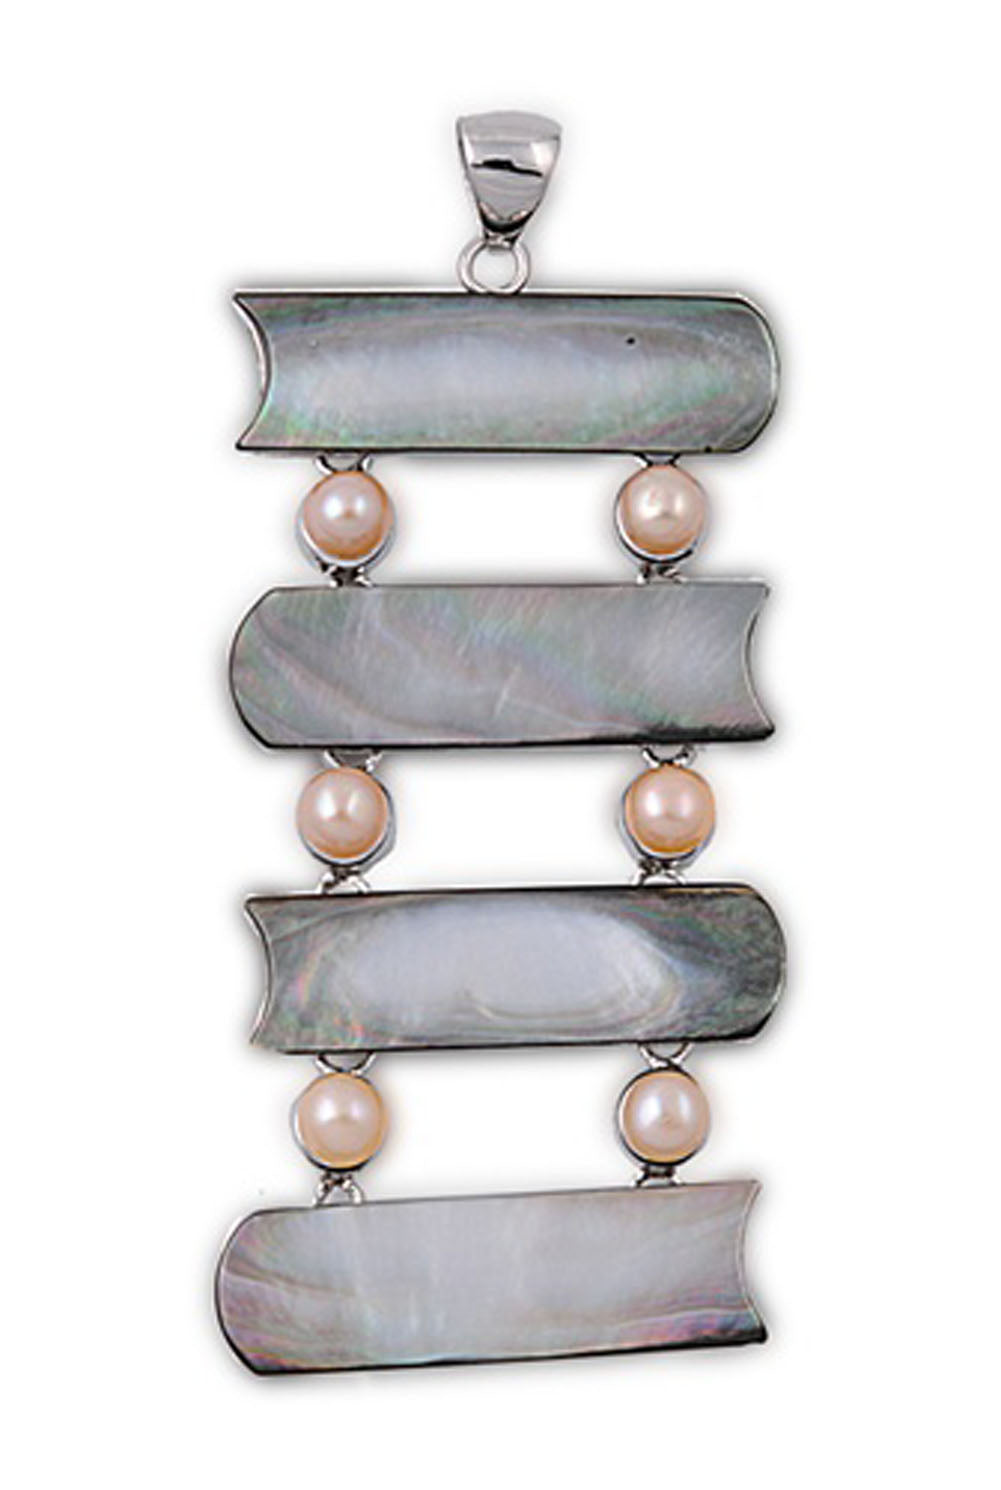 Hanging Ladder Pendant Simulated Abalone .925 Sterling Silver Nautical Charm